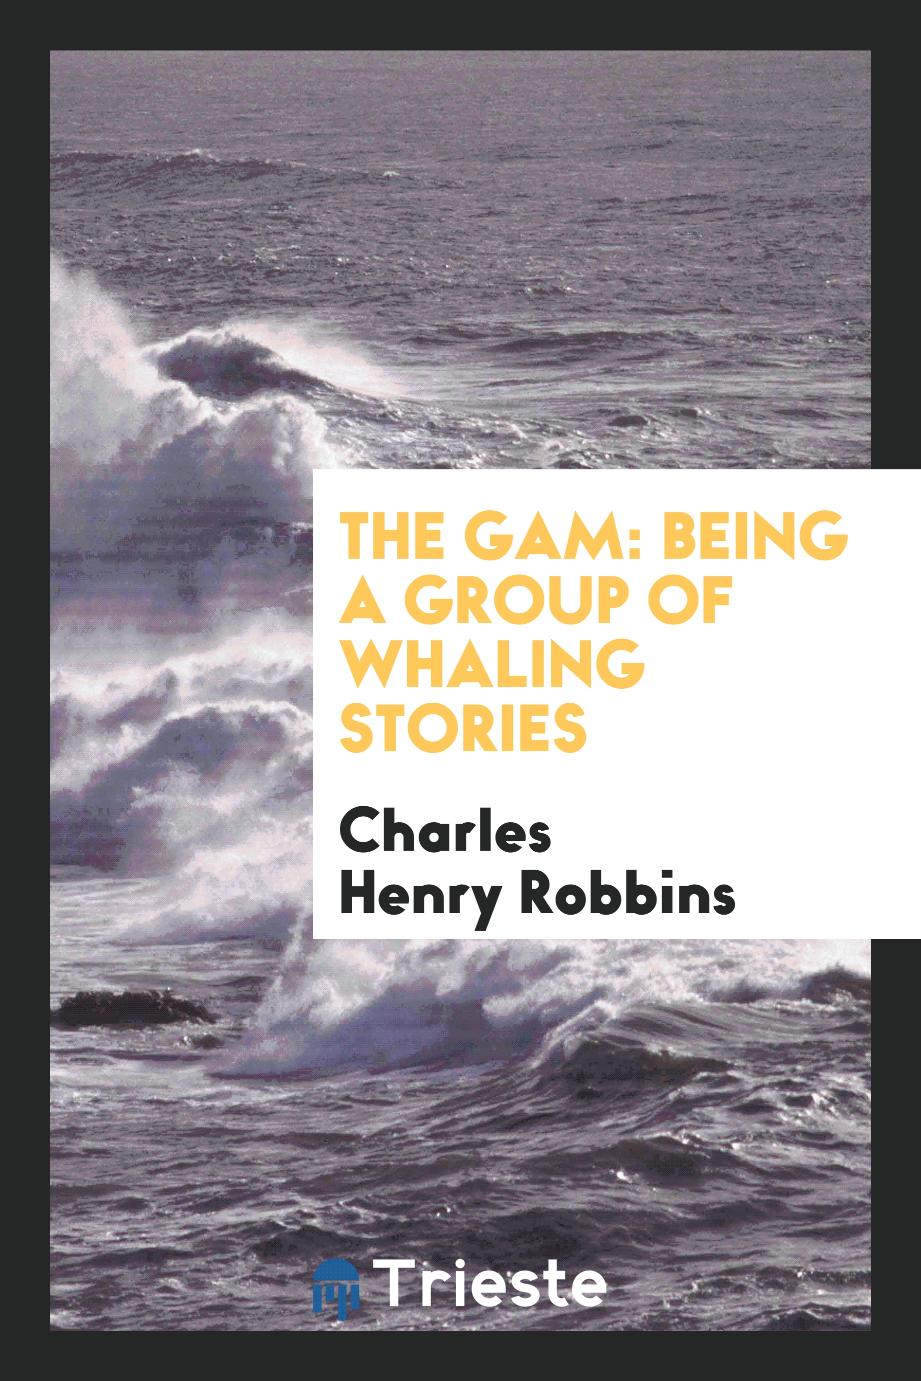 The Gam: being a group of whaling stories